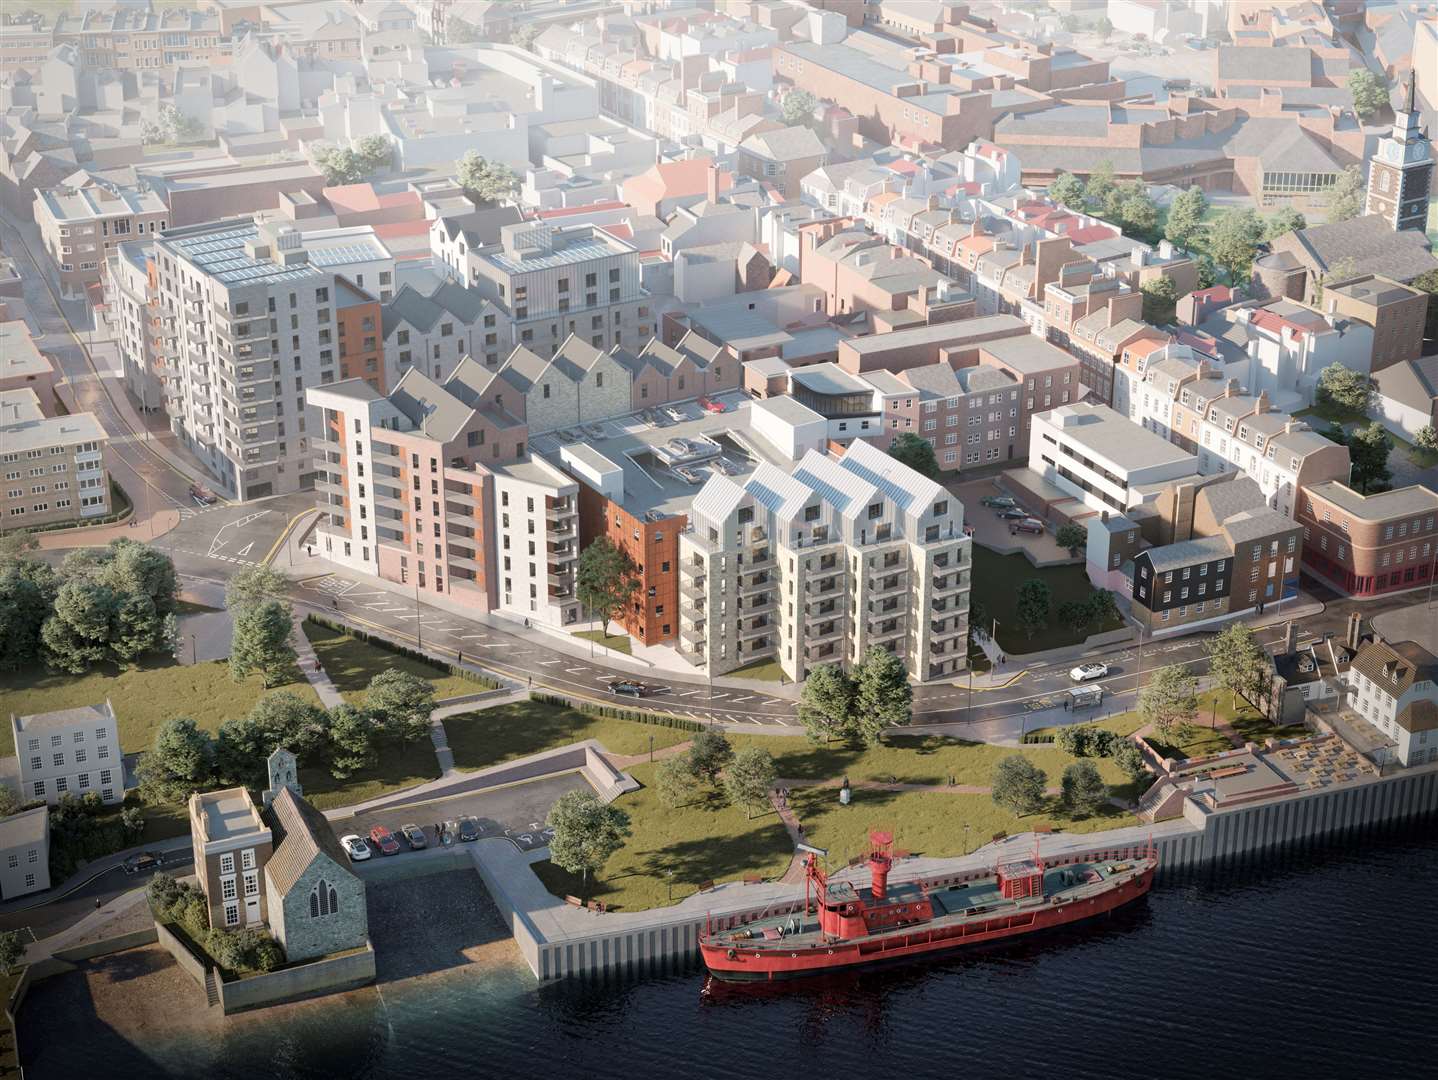 What it will look like once complete. Picture: Gravesham council